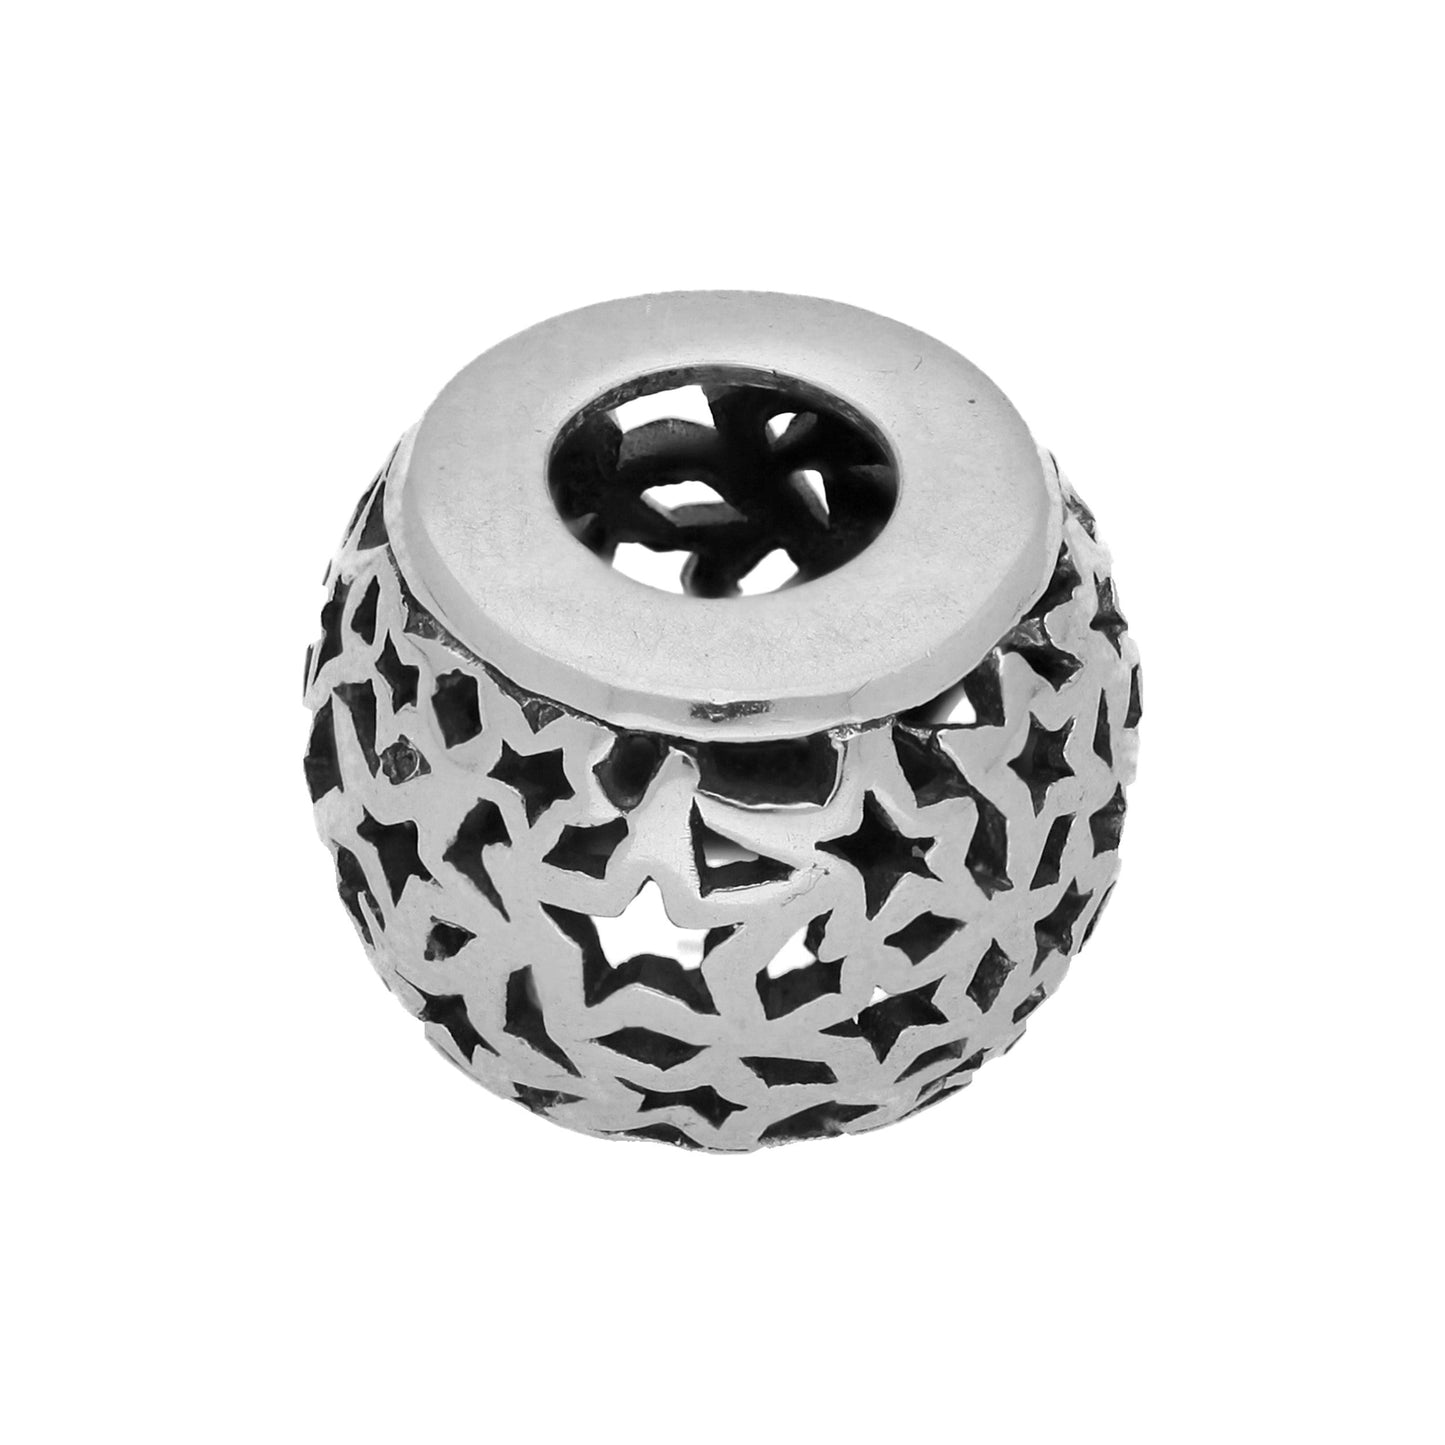 Sterling Silver Round Bead Charm with Cut Out Stars